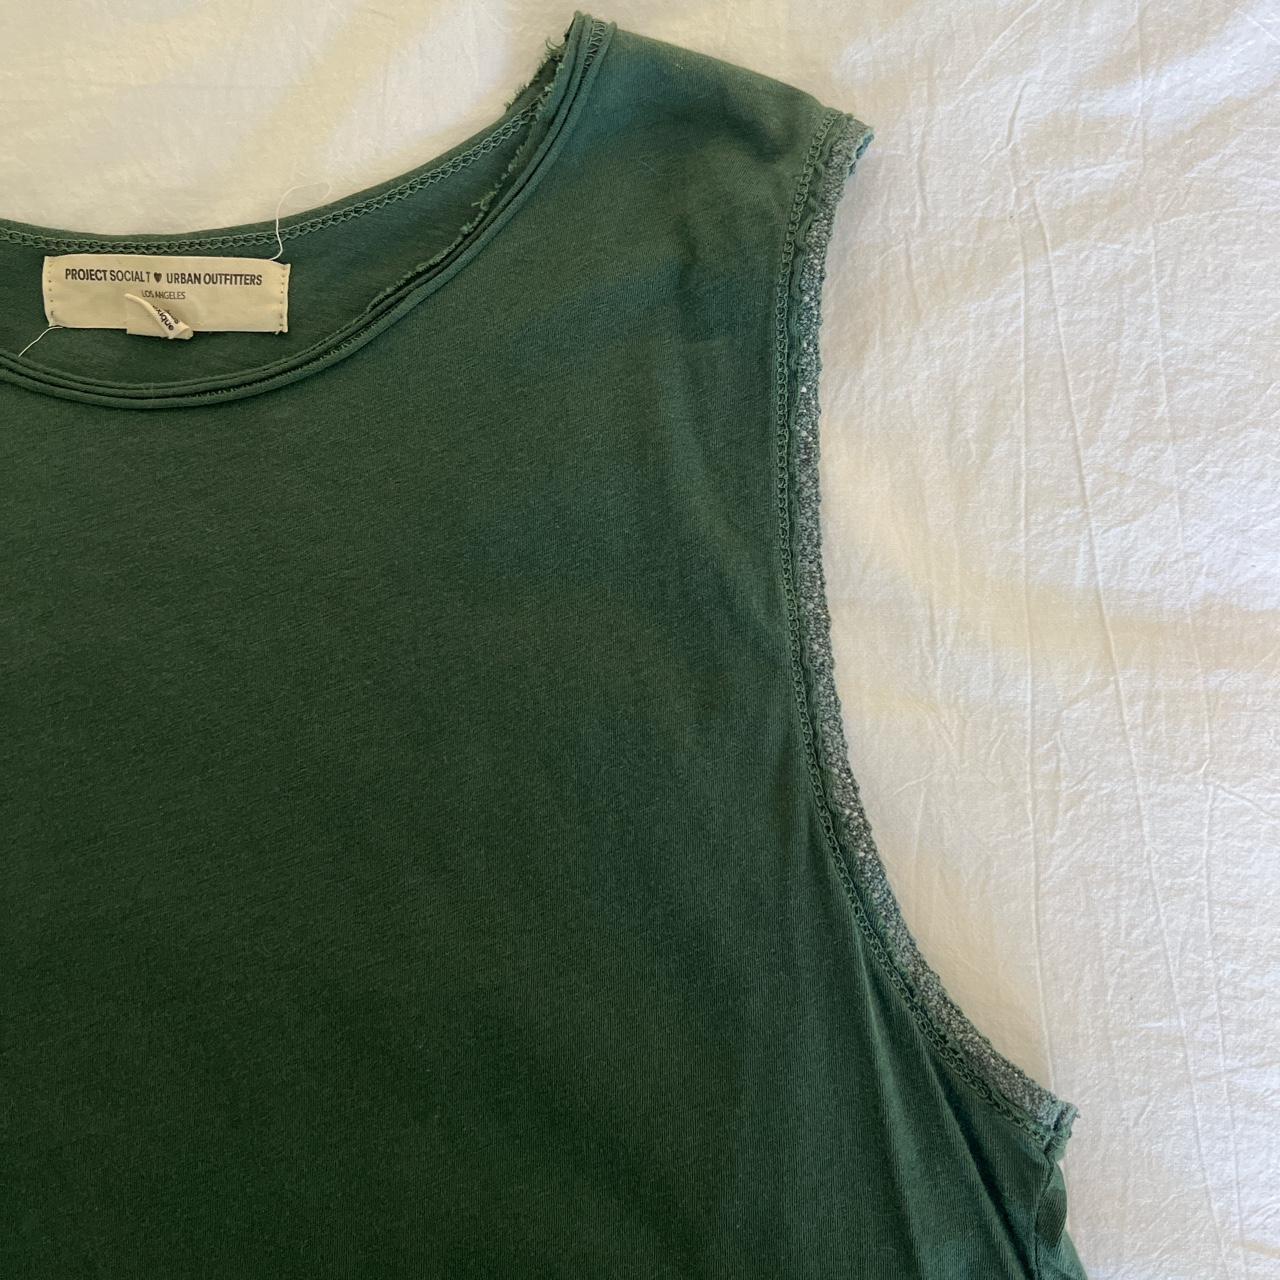 Urban Outfitters Women's Green Vest (3)